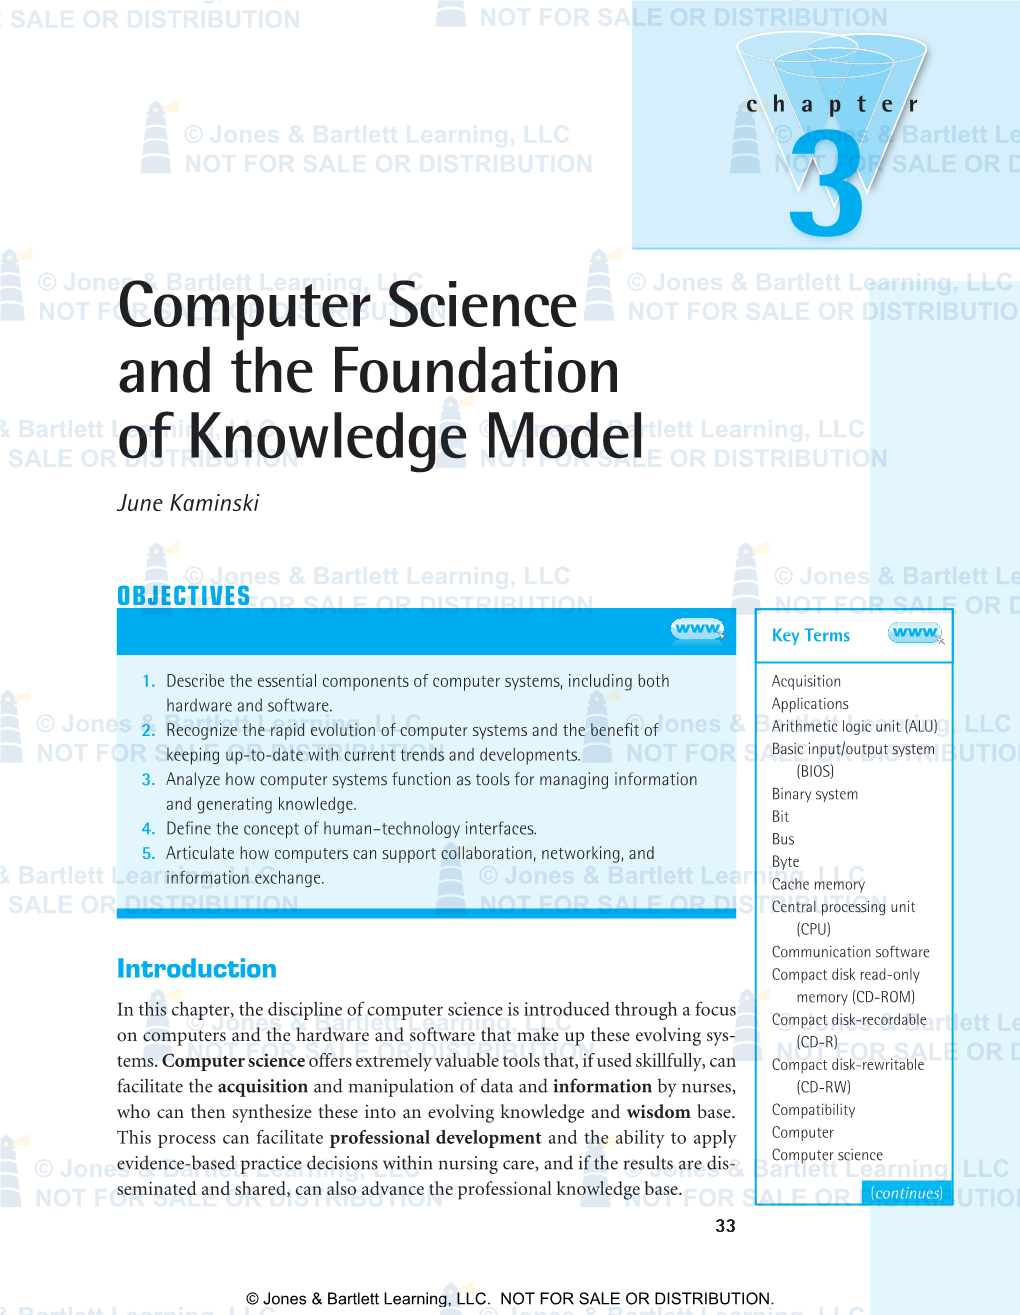 Computer Science and the Foundation of Knowledge Model